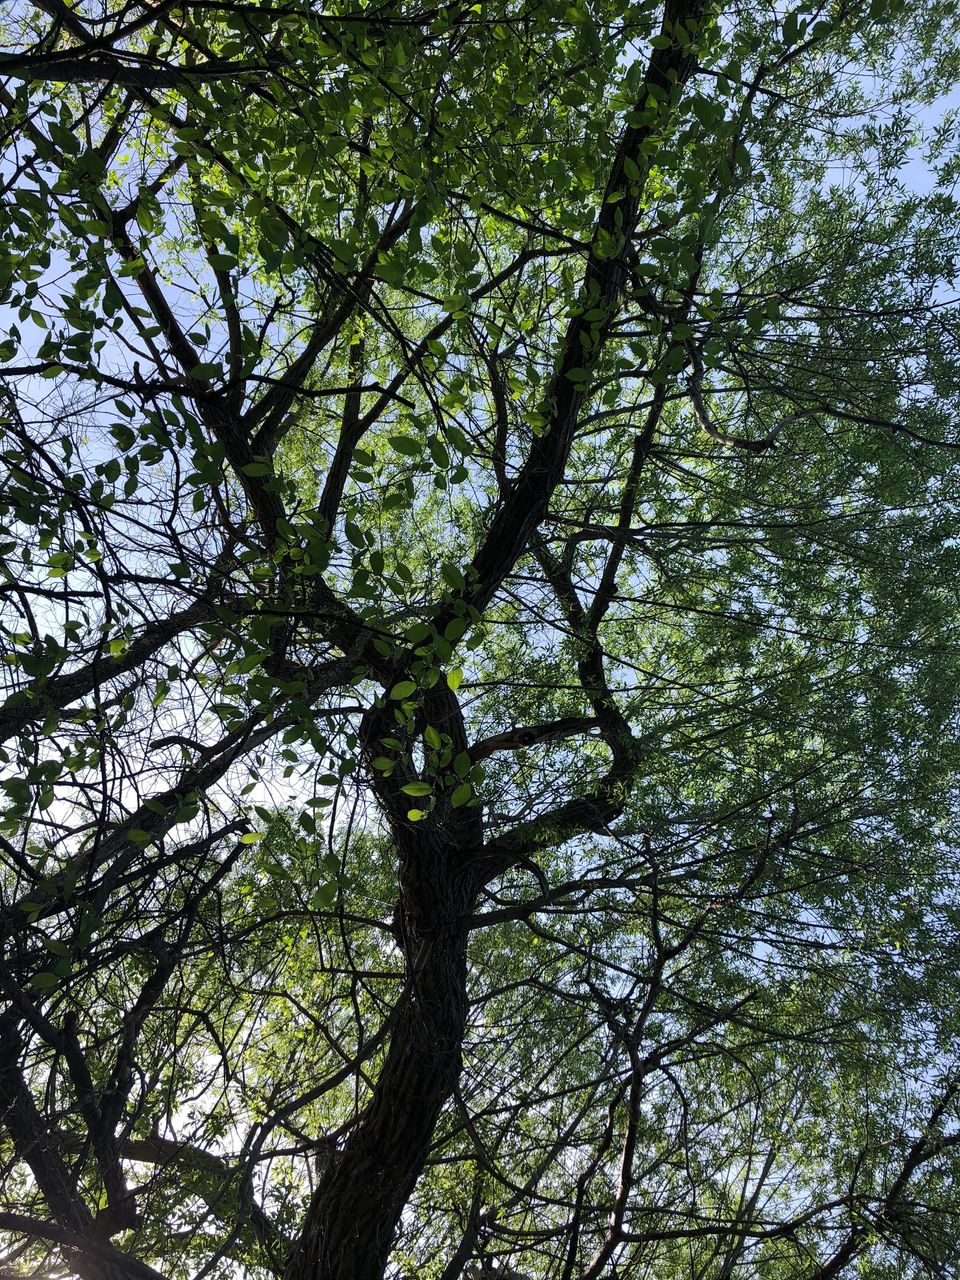 A twisting elm tree photographed from beneath its canopy, looking like a dancer arching her back against the sky.